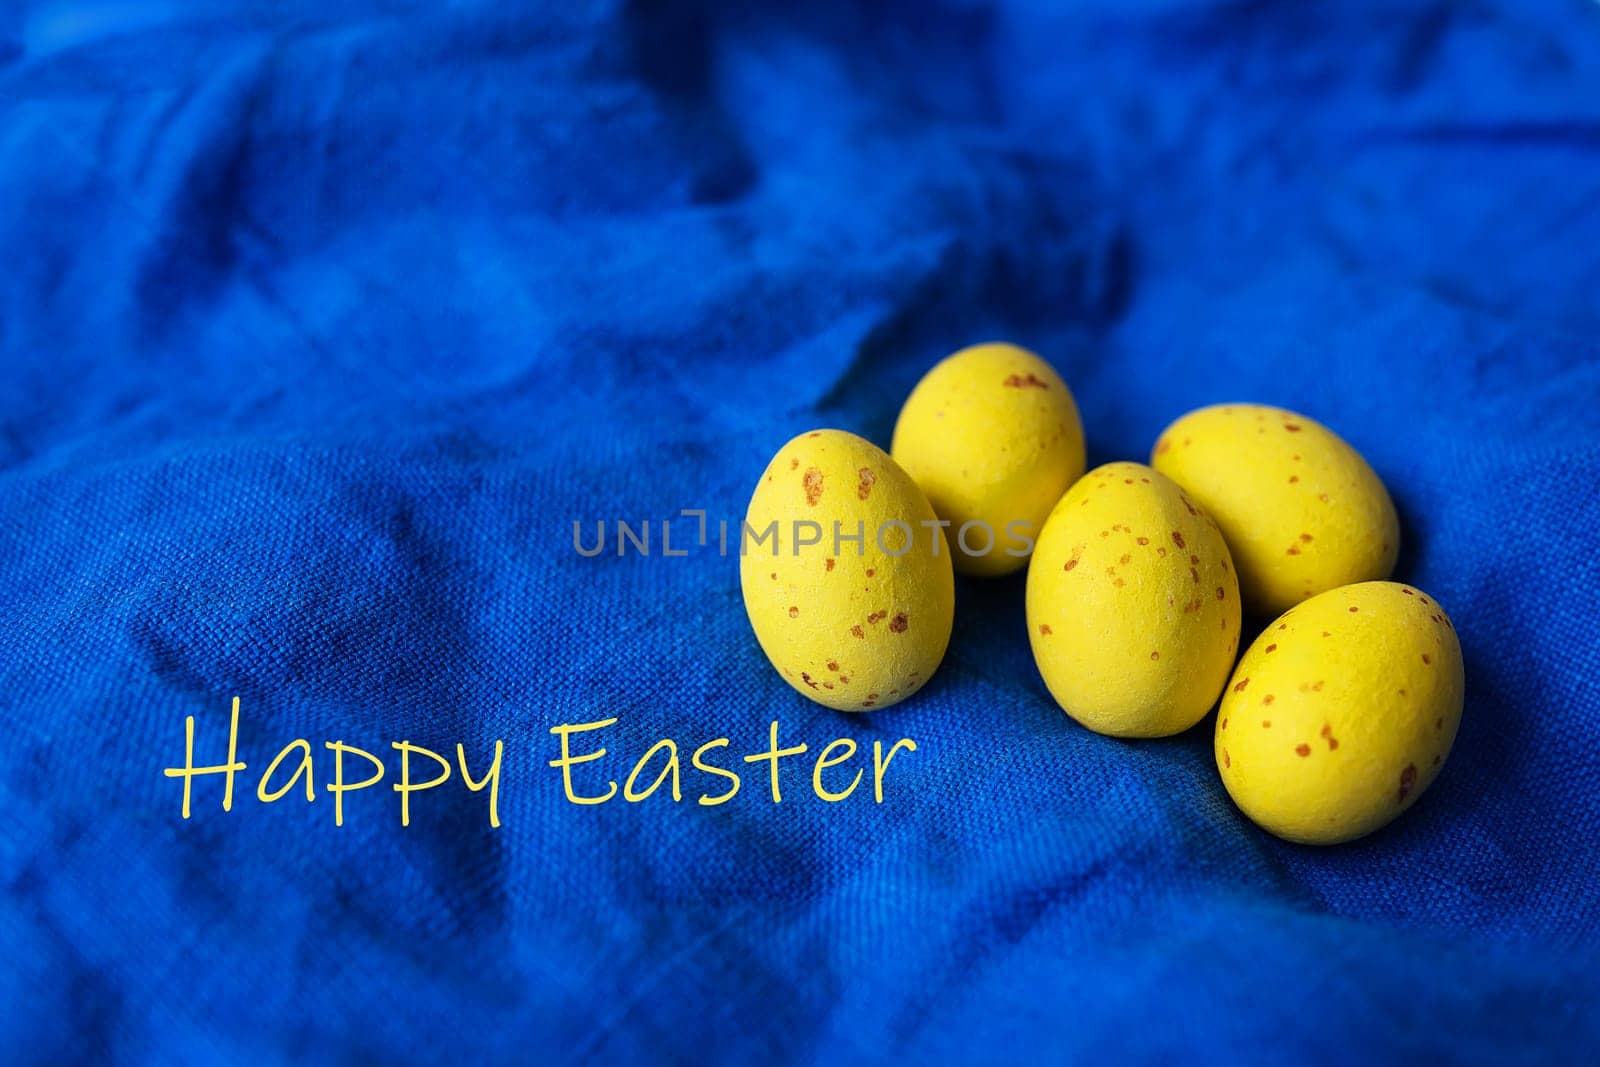 Top view of yellow decorated Easter eggs on napkin on blue textured linen background. Greeting card with the inscription Happy Easter. by sfinks